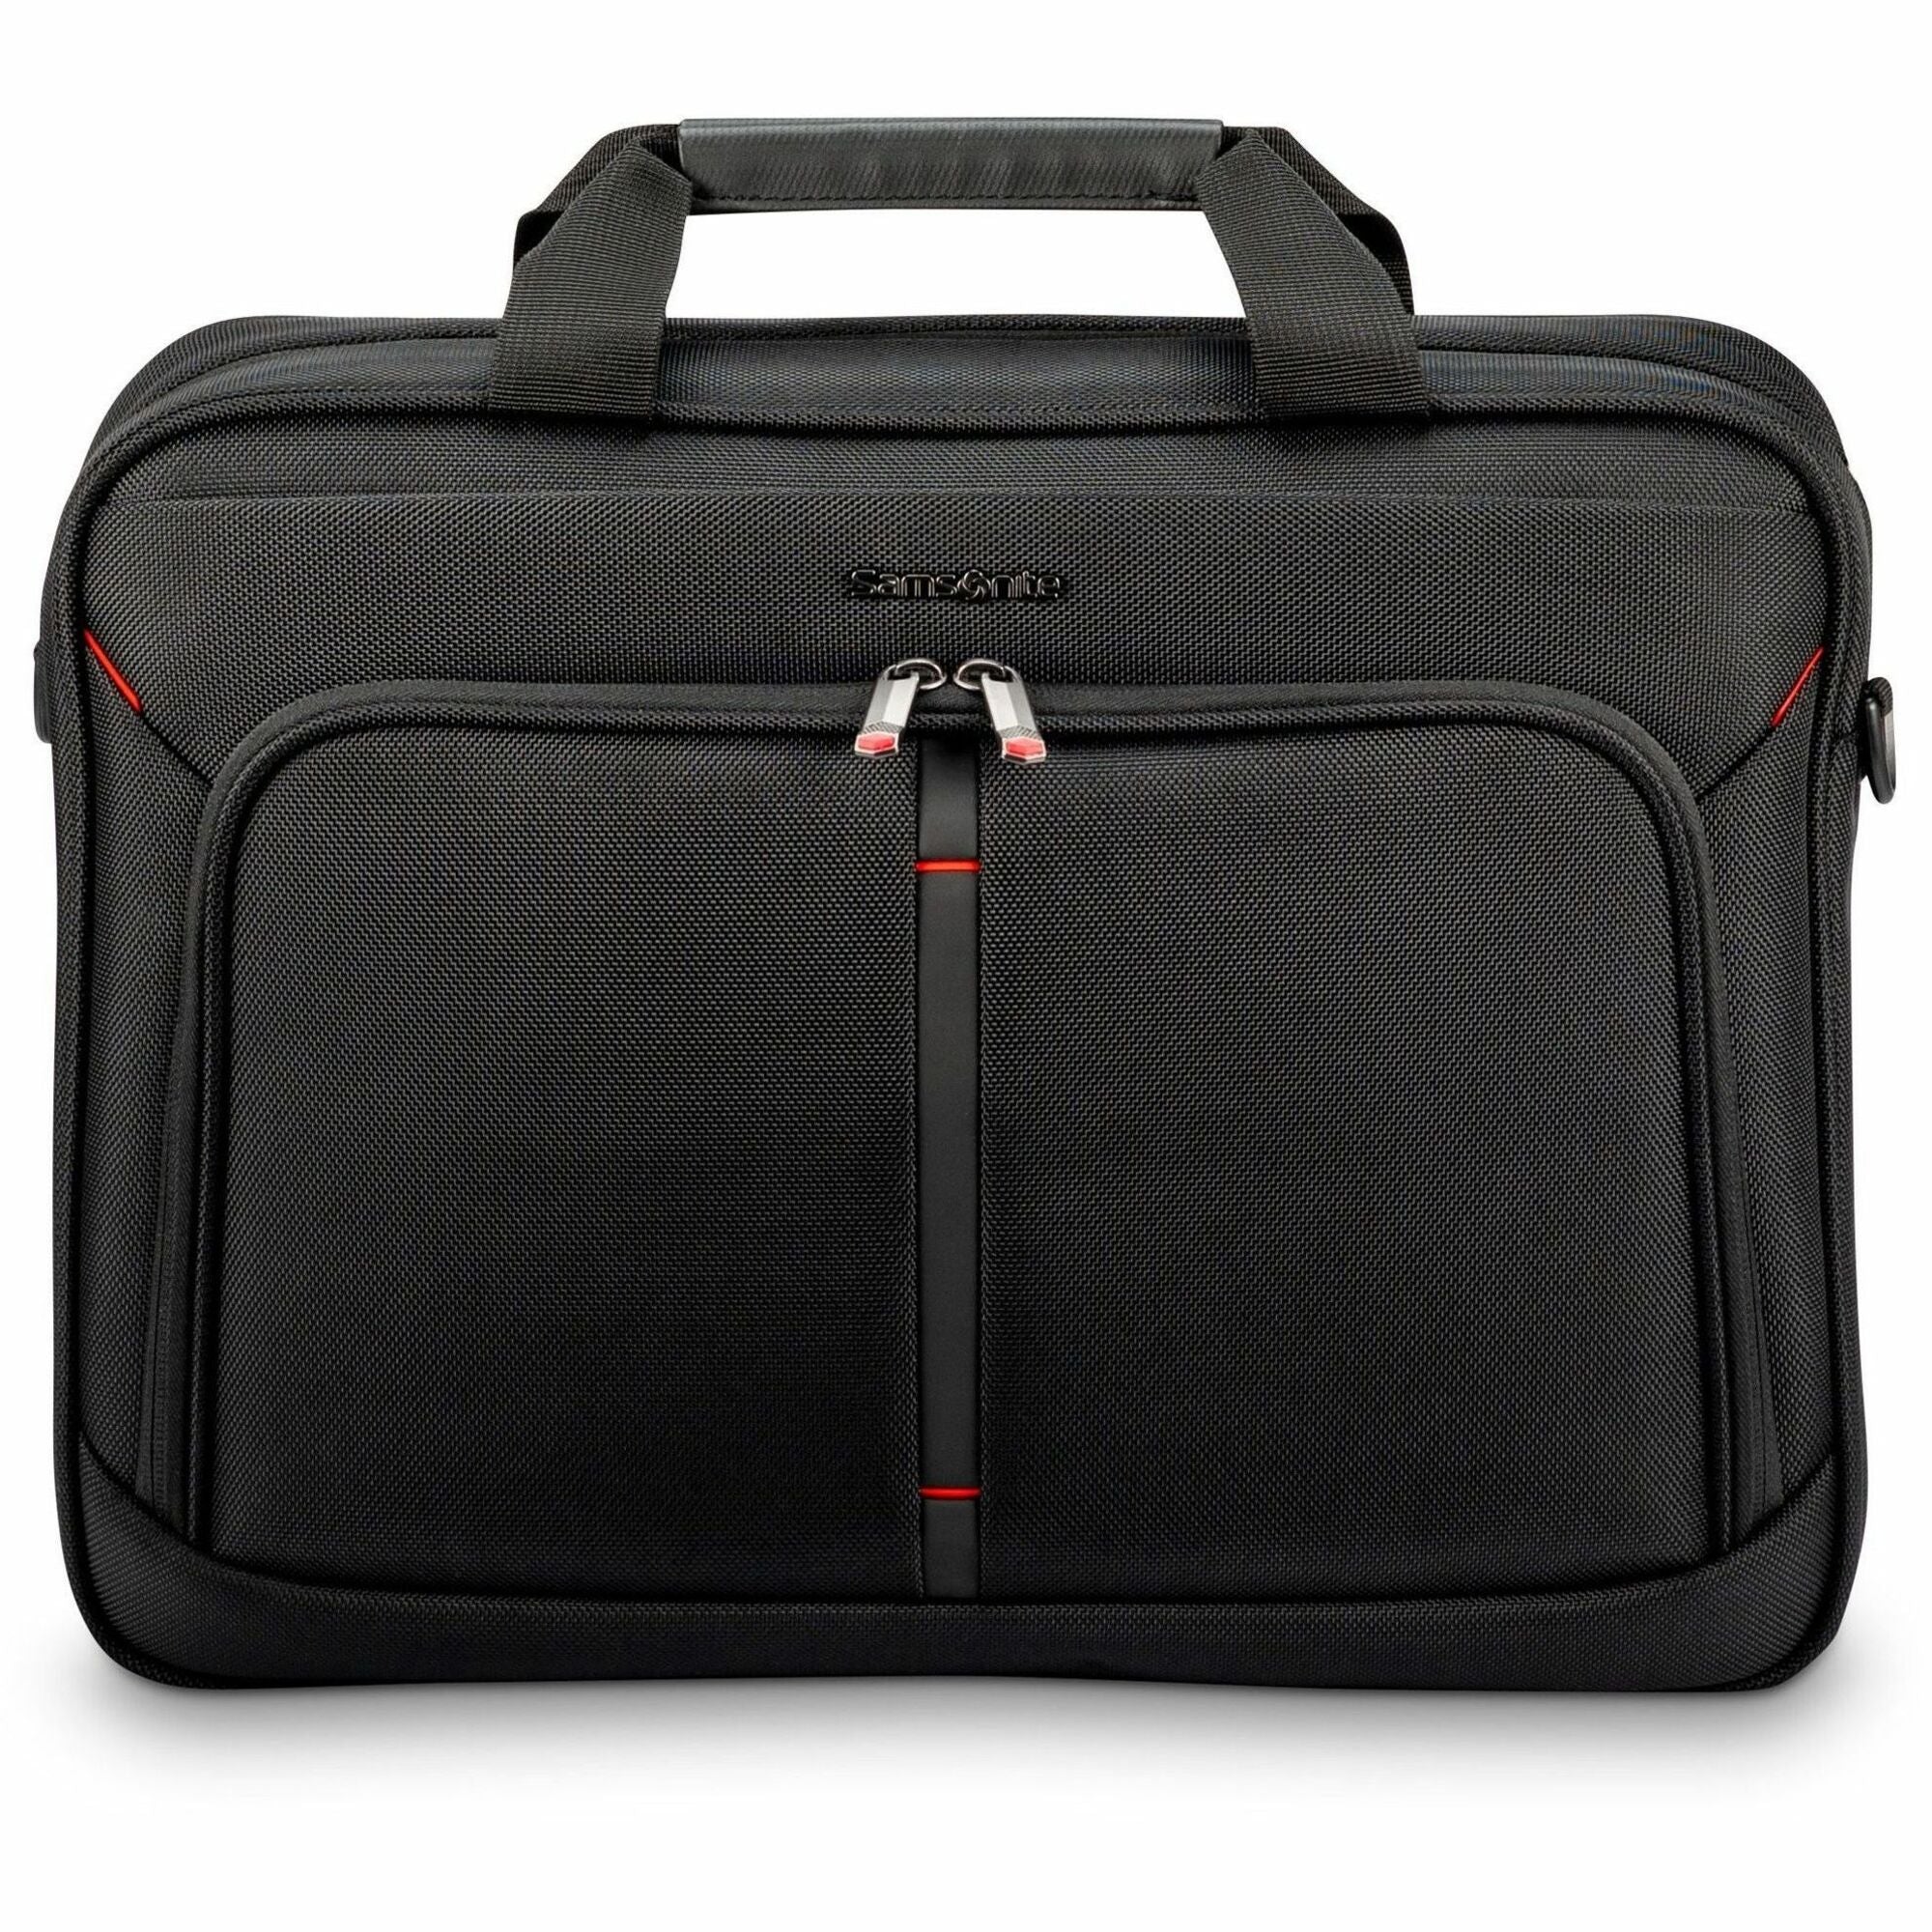 samsonite-xenon-40-carrying-case-briefcase-for-129-to-156-notebook-tablet-travel-electronics-black-1680d-ballistic-polyester-tricot-body-trolley-strap-55-height-x-125-width-x-17-depth-1-each_sml1473271041 - 1